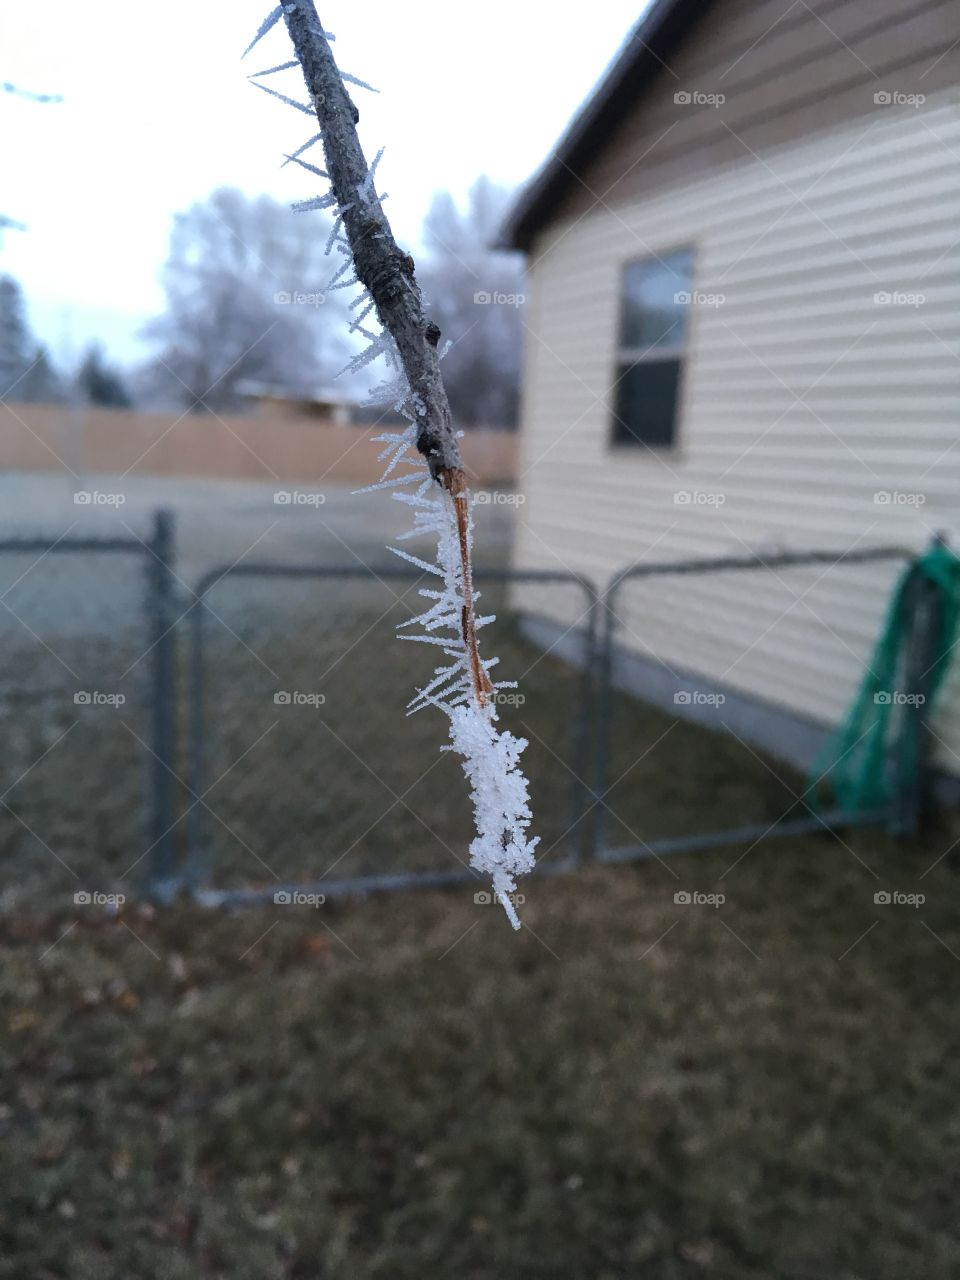 Icy tree branch.